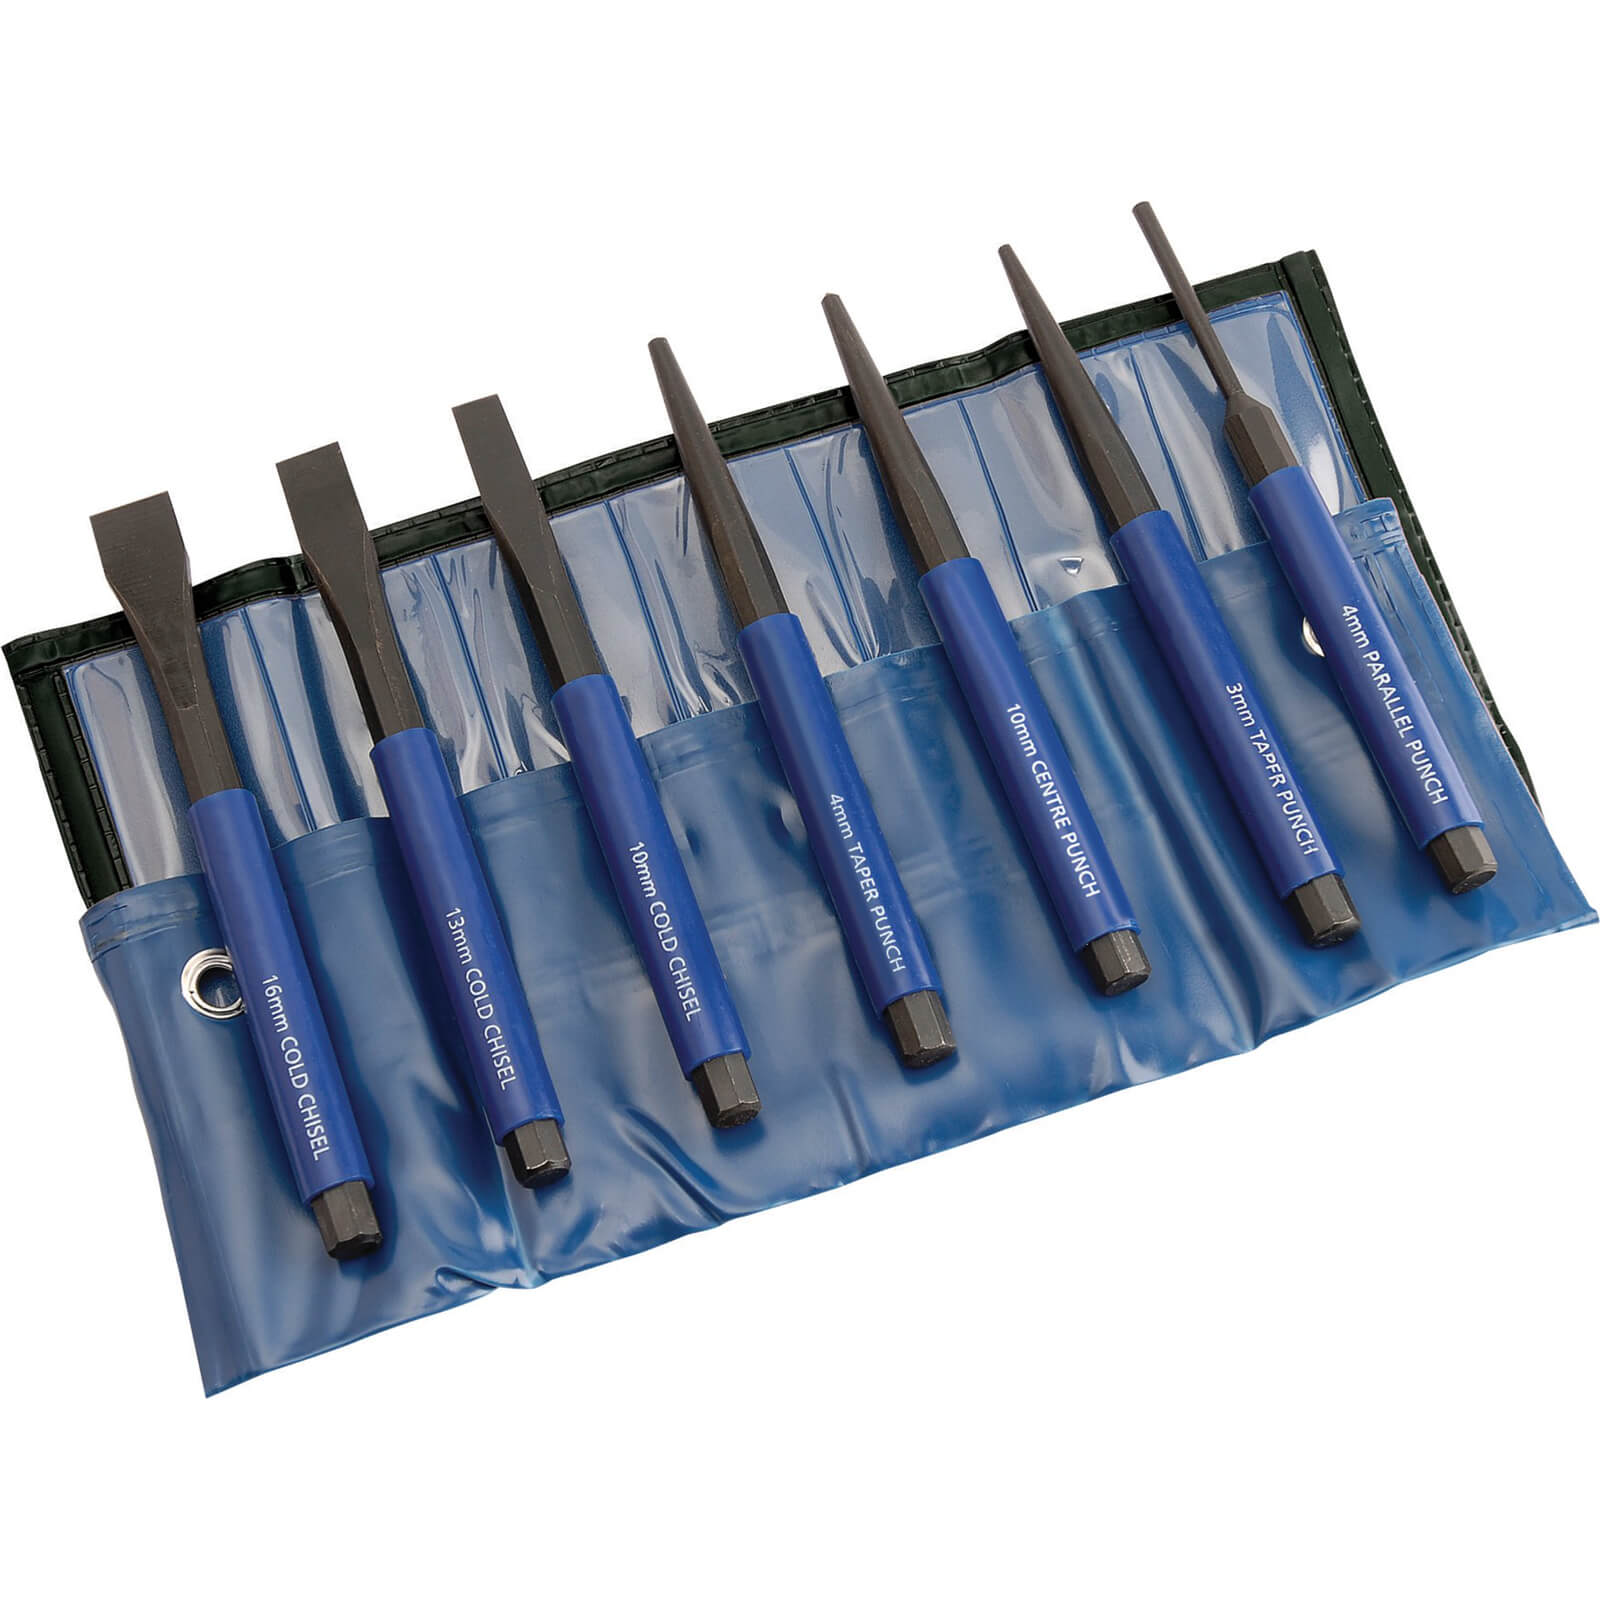 Image of Draper 7 Piece Cold Chisel and Punch Set